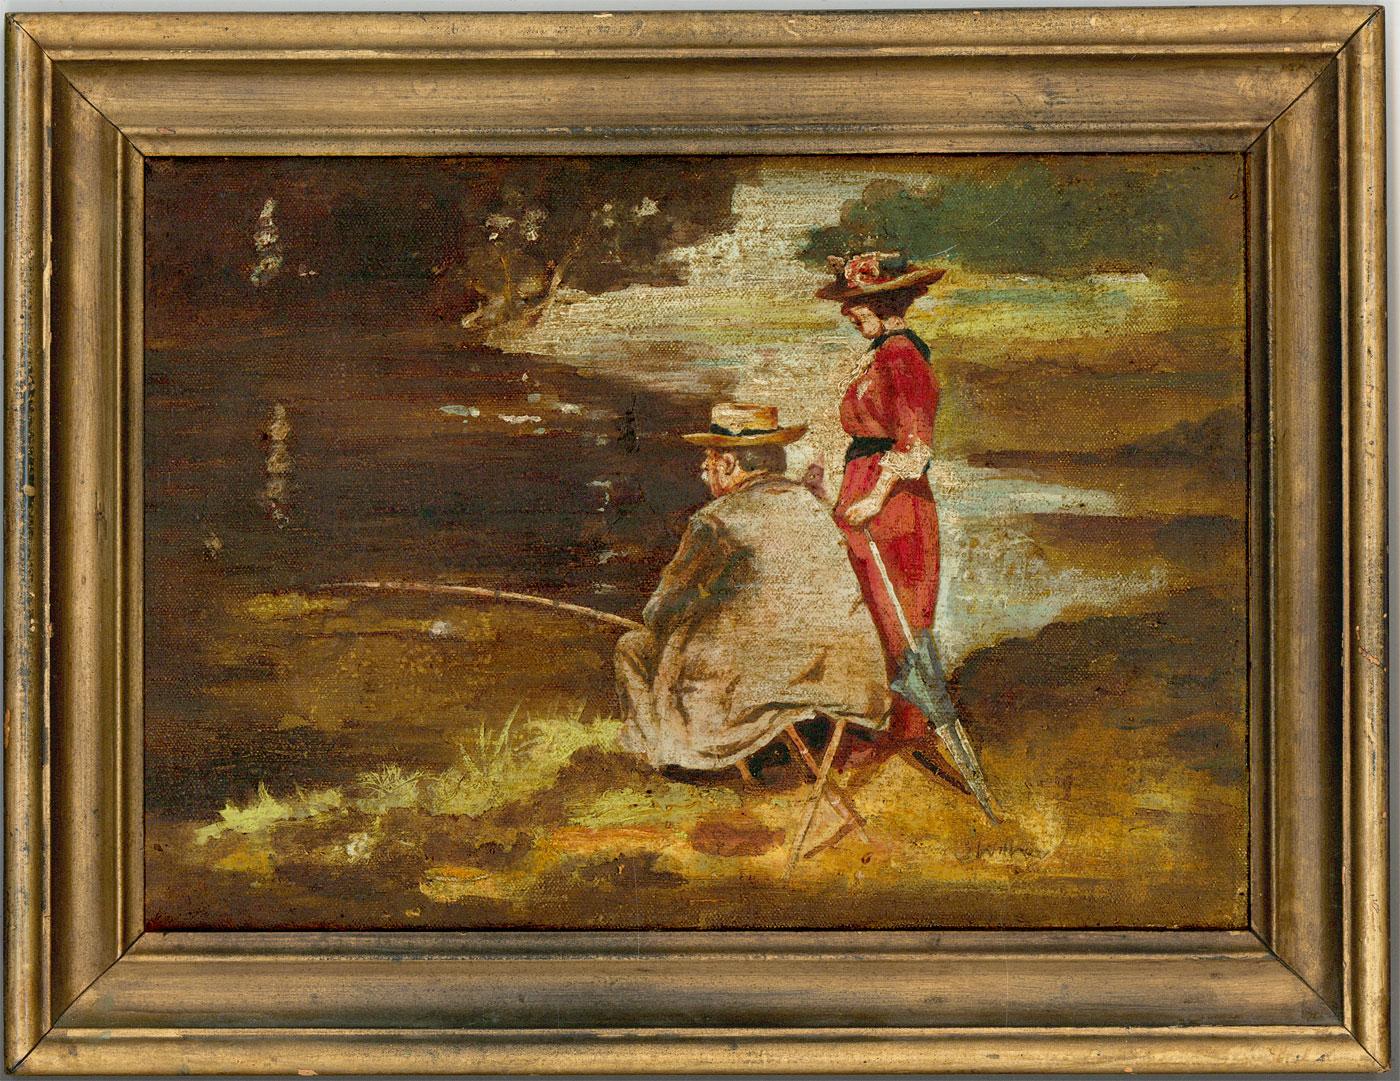 Unknown Landscape Painting - C. Wilhay - Signed and Framed Mid 20th Century Oil, Fishing at the Lake